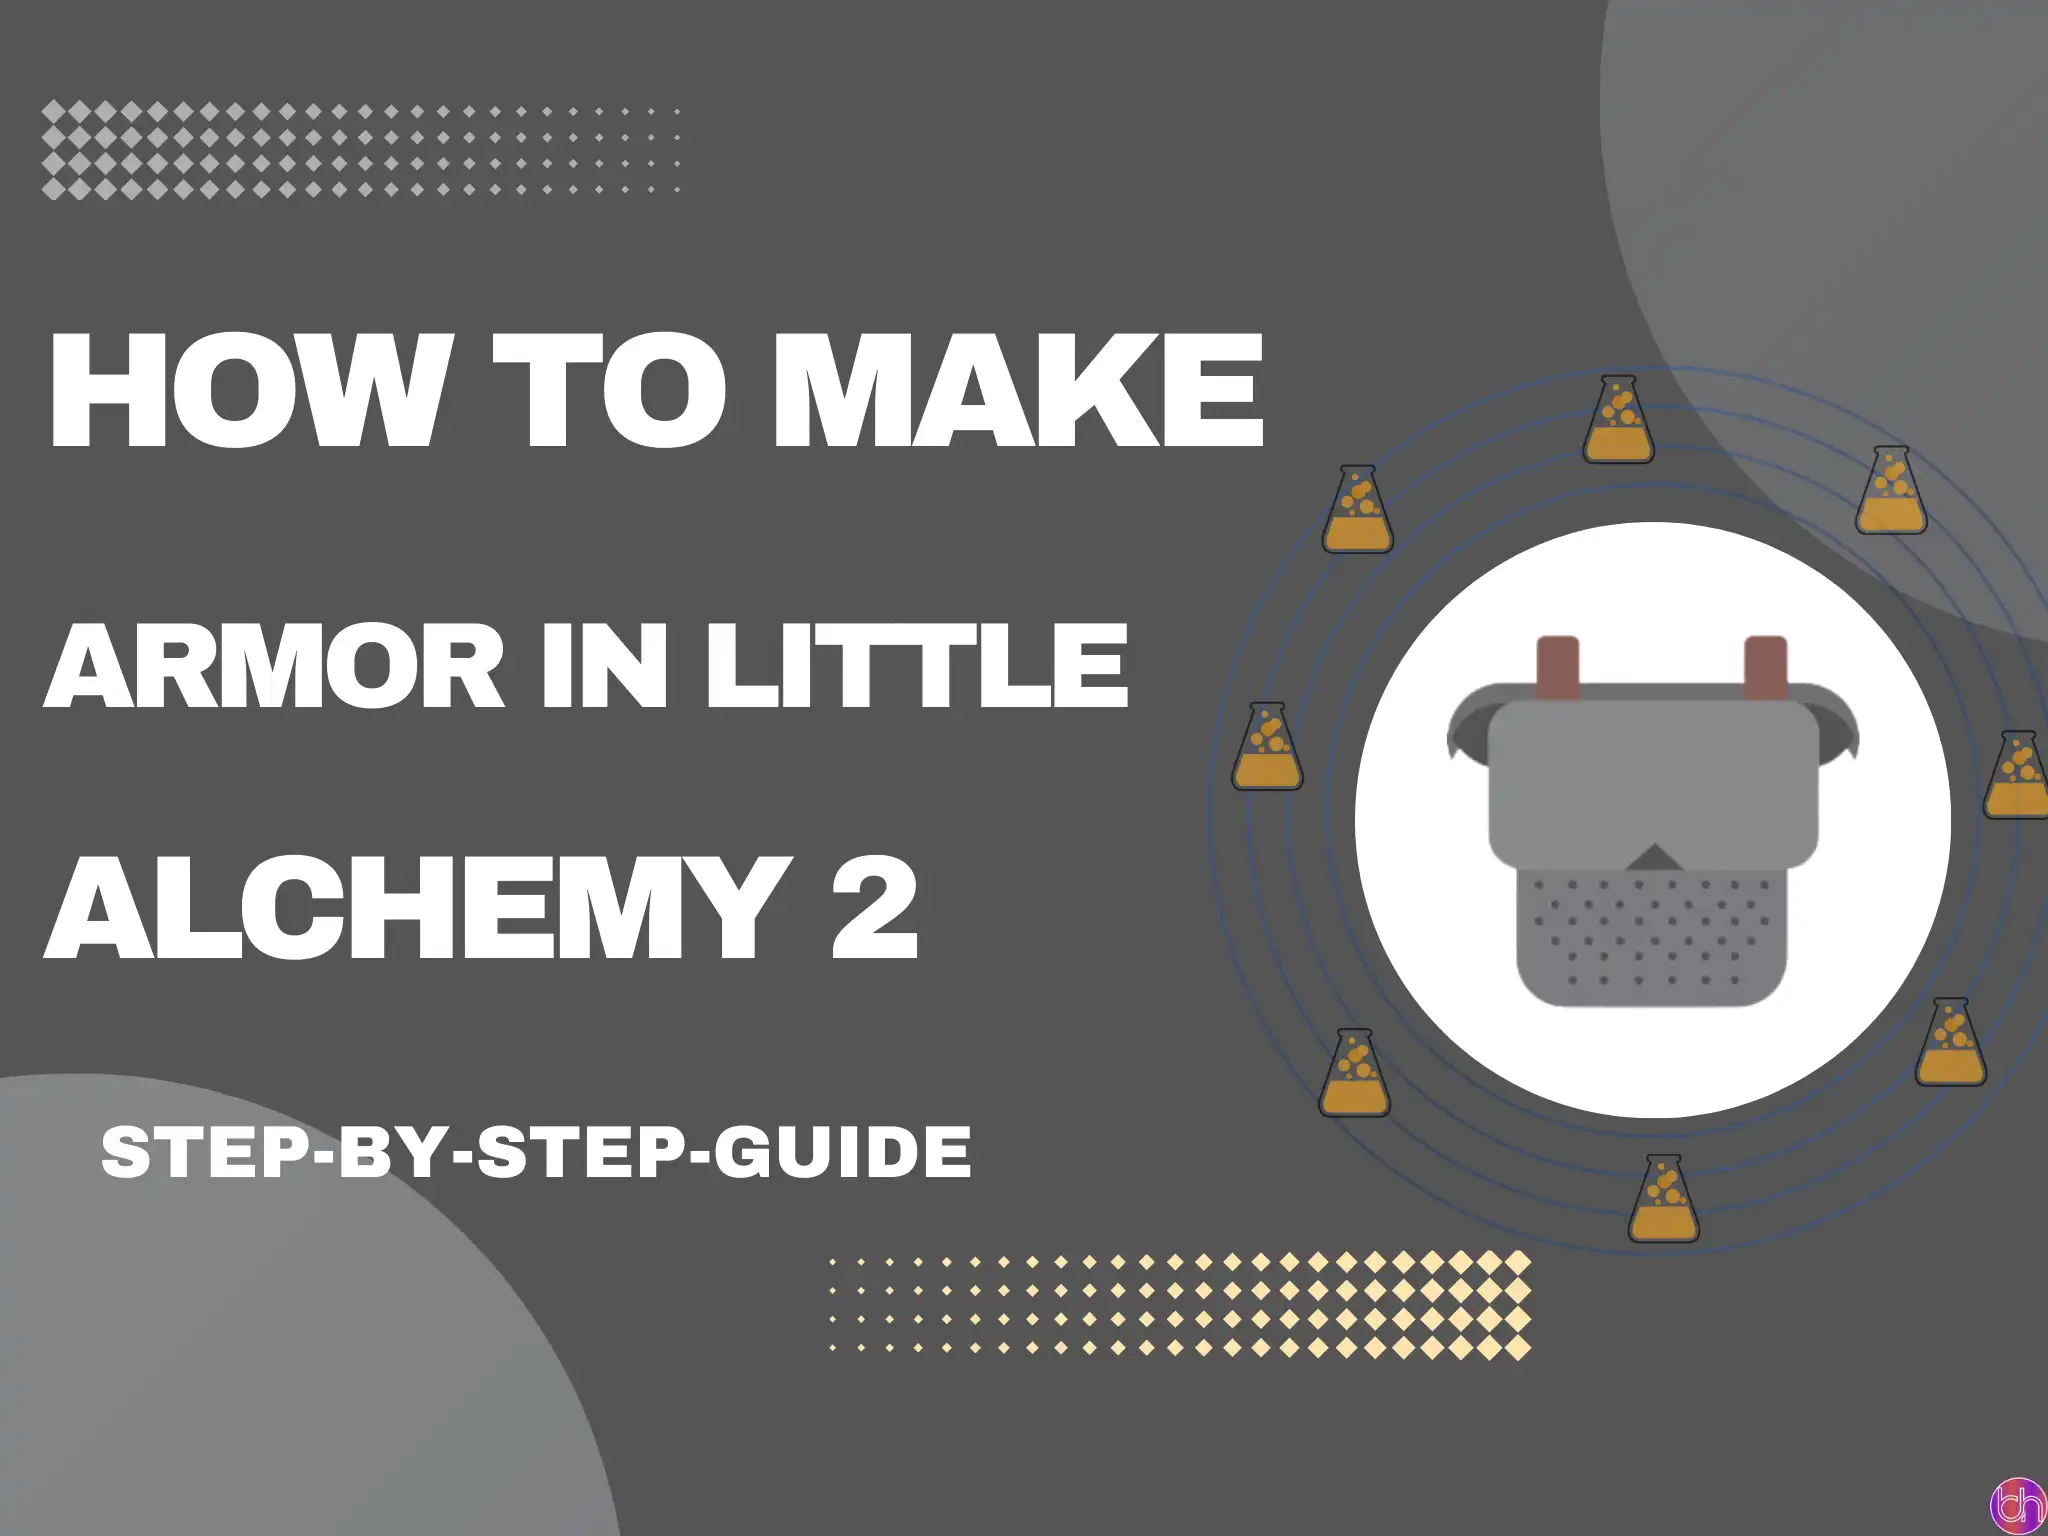 How to make Armor in Little Alchemy 2